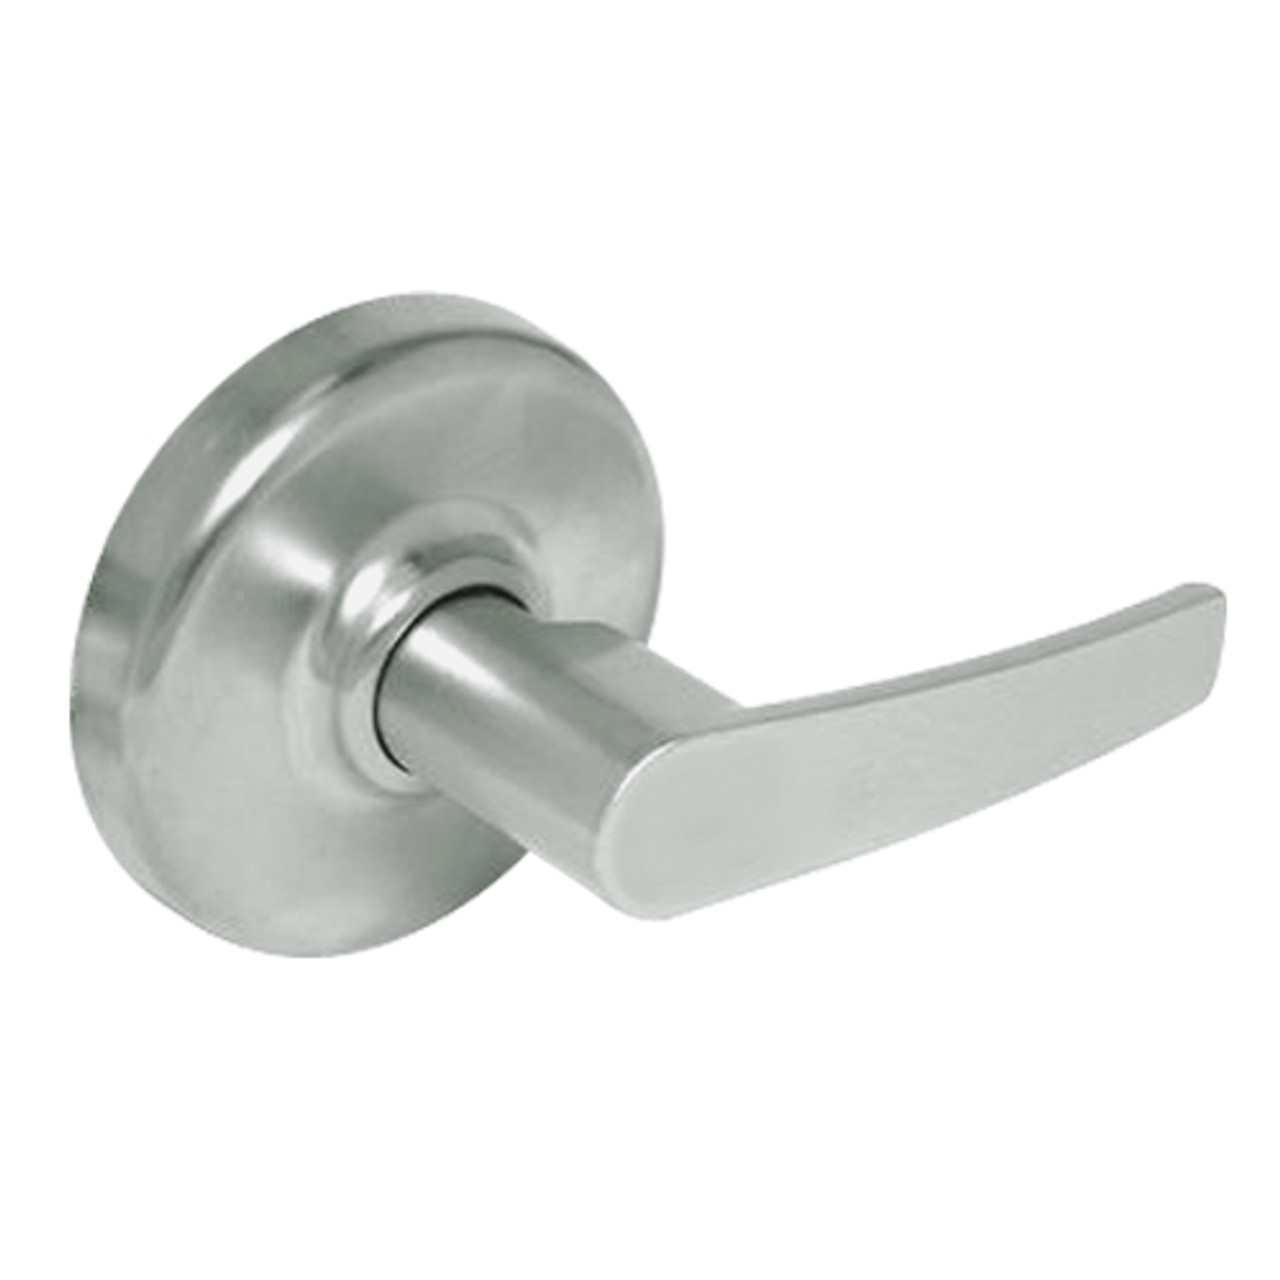 CL3370-AZD-619 Corbin CL3300 Series Extra Heavy Duty Full Dummy Cylindrical Locksets with Armstrong Lever in Satin Nickel Plated Finish